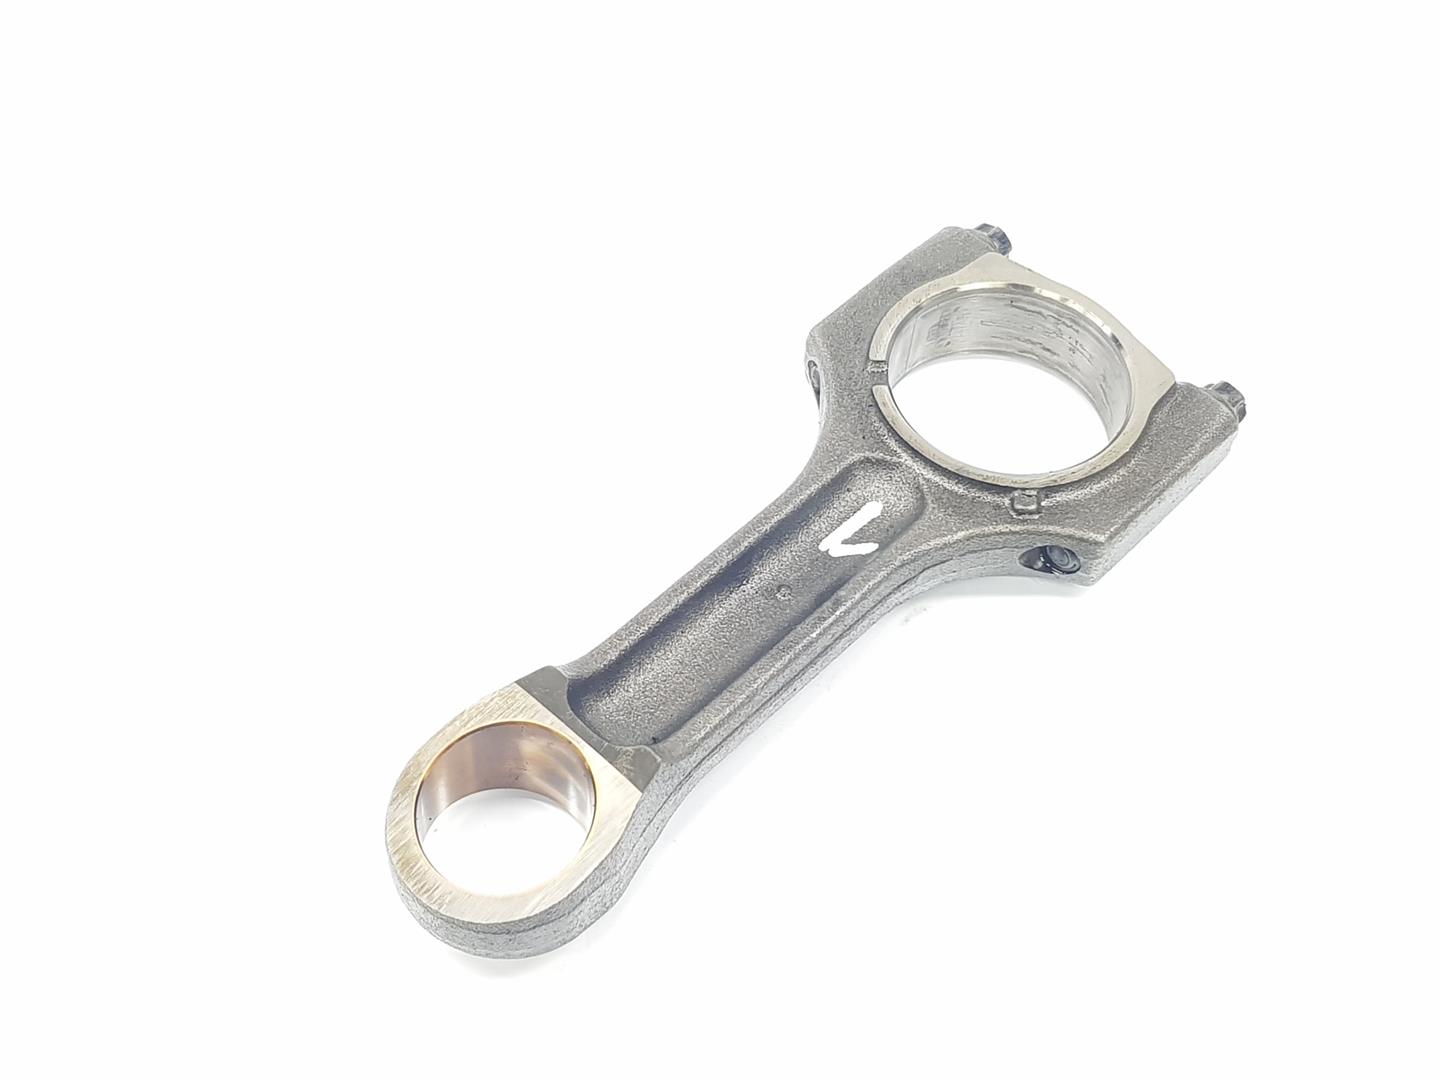 BMW X3 E83 (2003-2010) Connecting Rod 11240308859, 11240308859, 1111AA 24230045